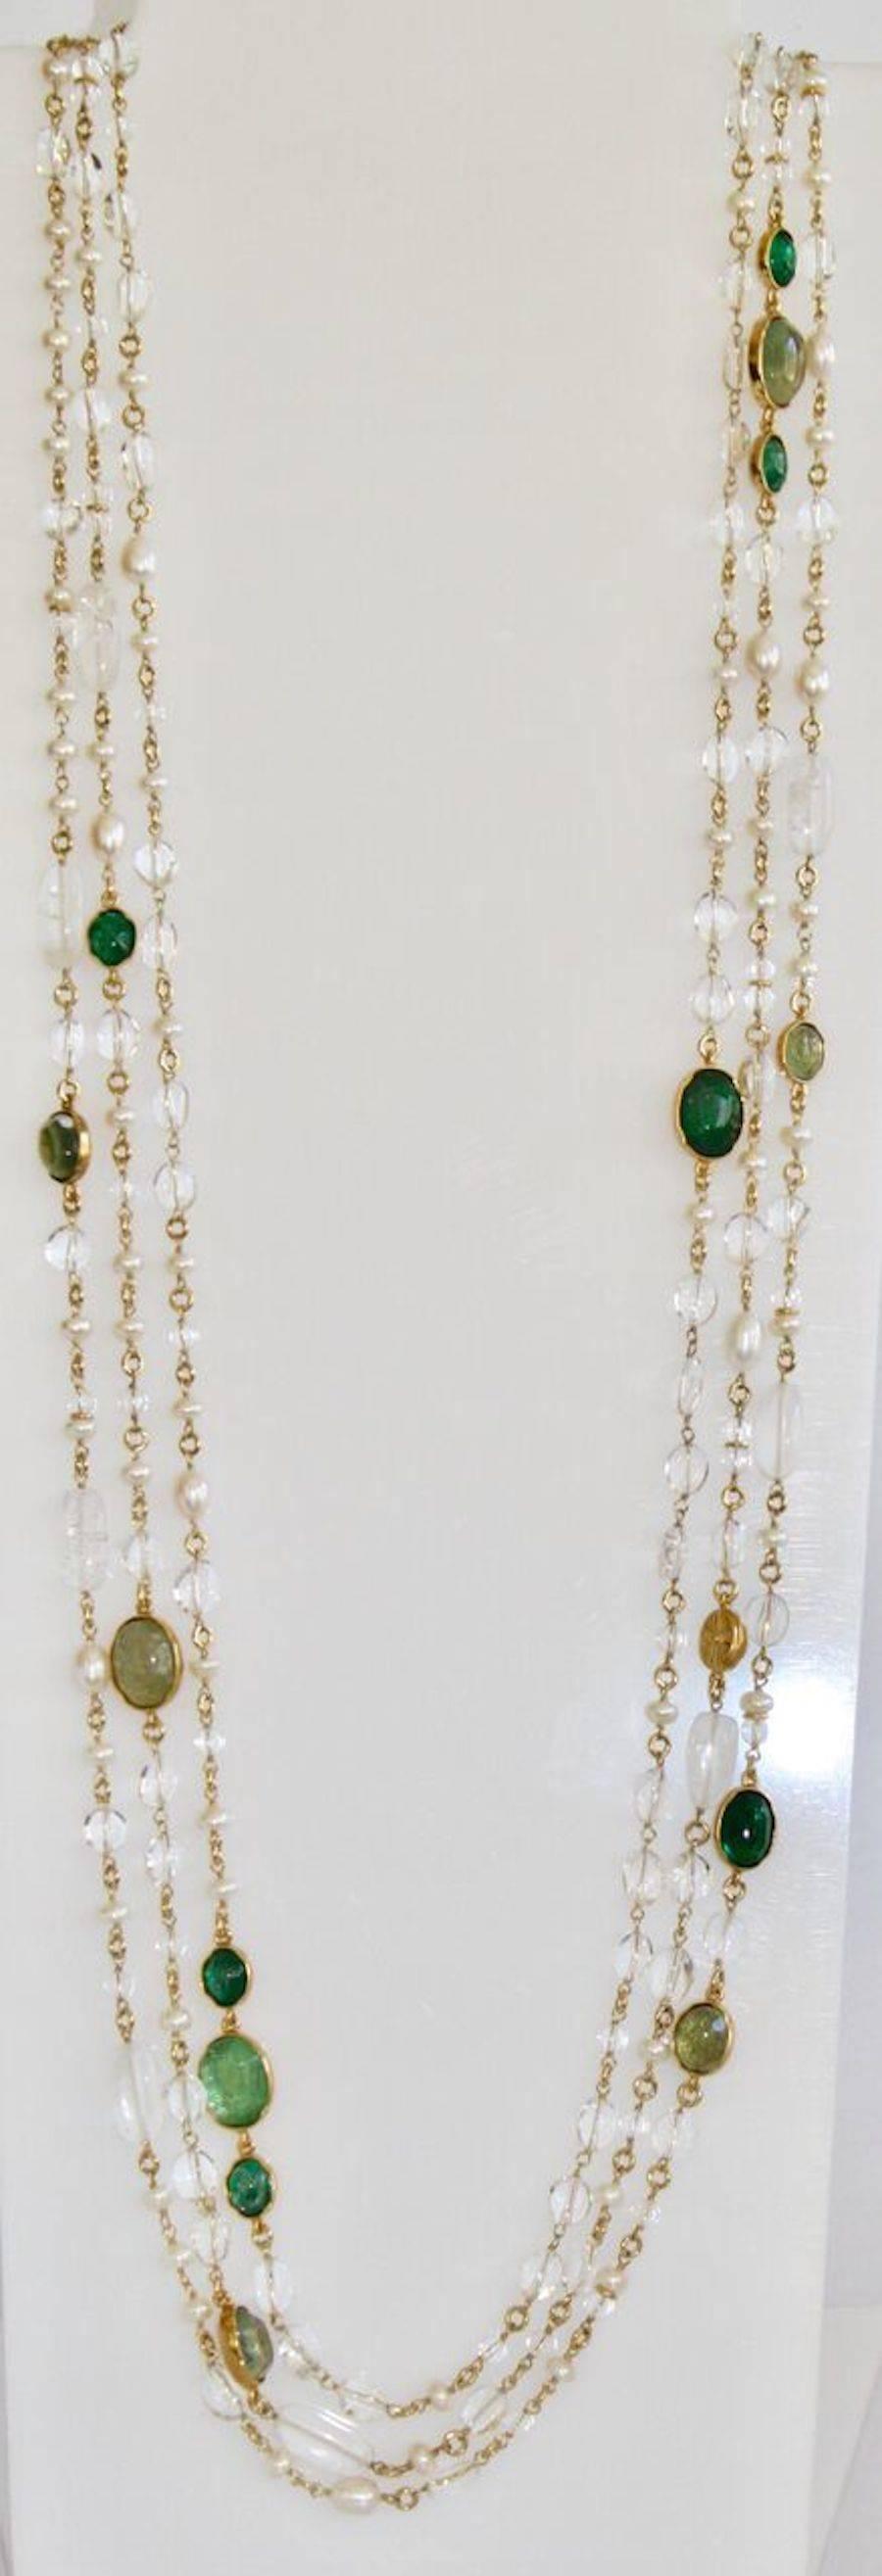 Goossens Paris triple row necklace with clear rock crystals, hand tinted green rock crystals, and natural pearls. Item can be worn long or can be doubled and turned into a luxurious 6 row necklace. 

50